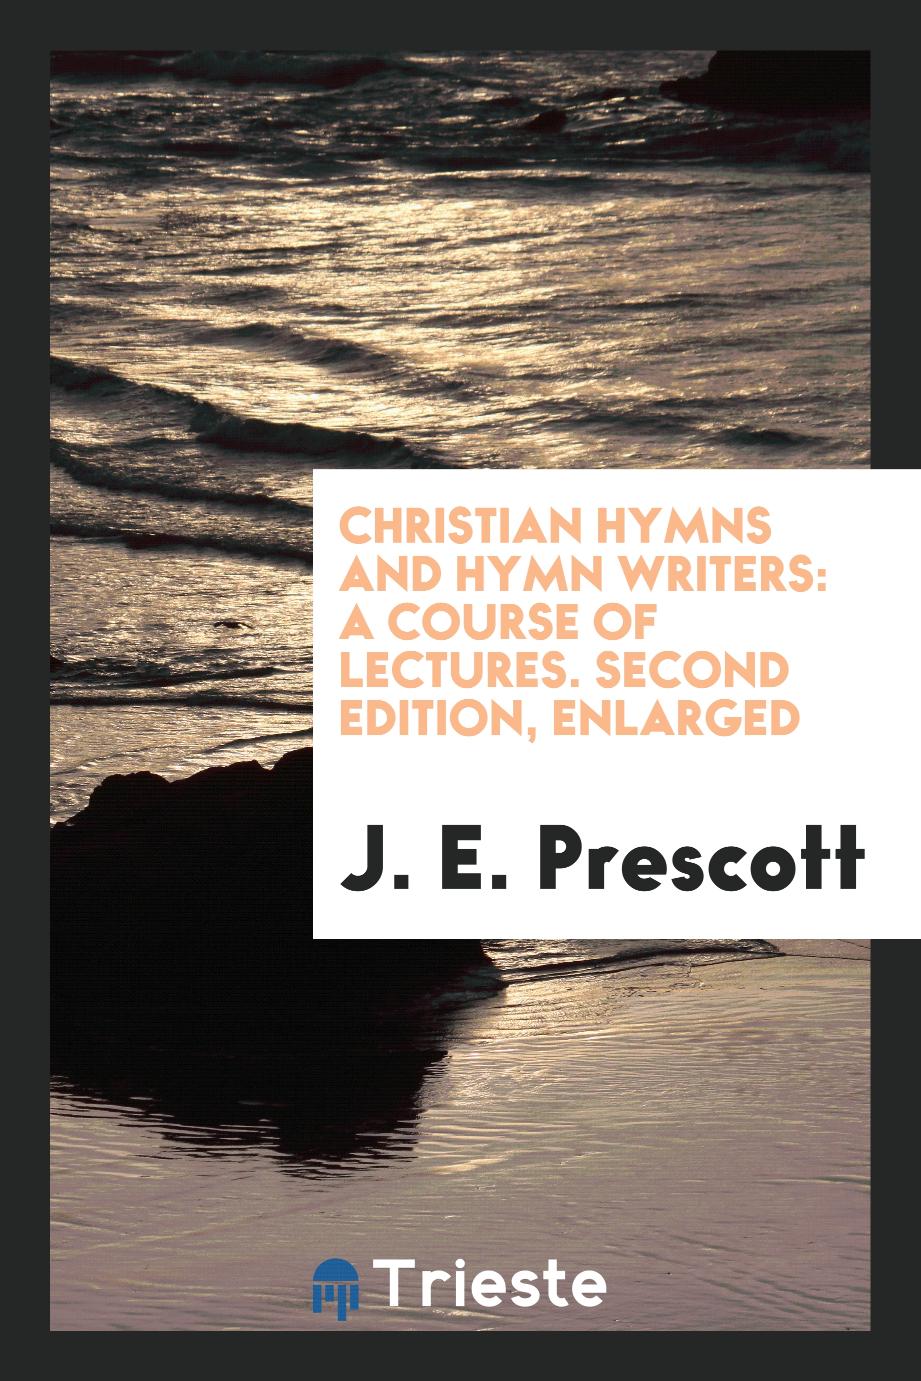 Christian Hymns and Hymn Writers: A Course of Lectures. Second Edition, Enlarged